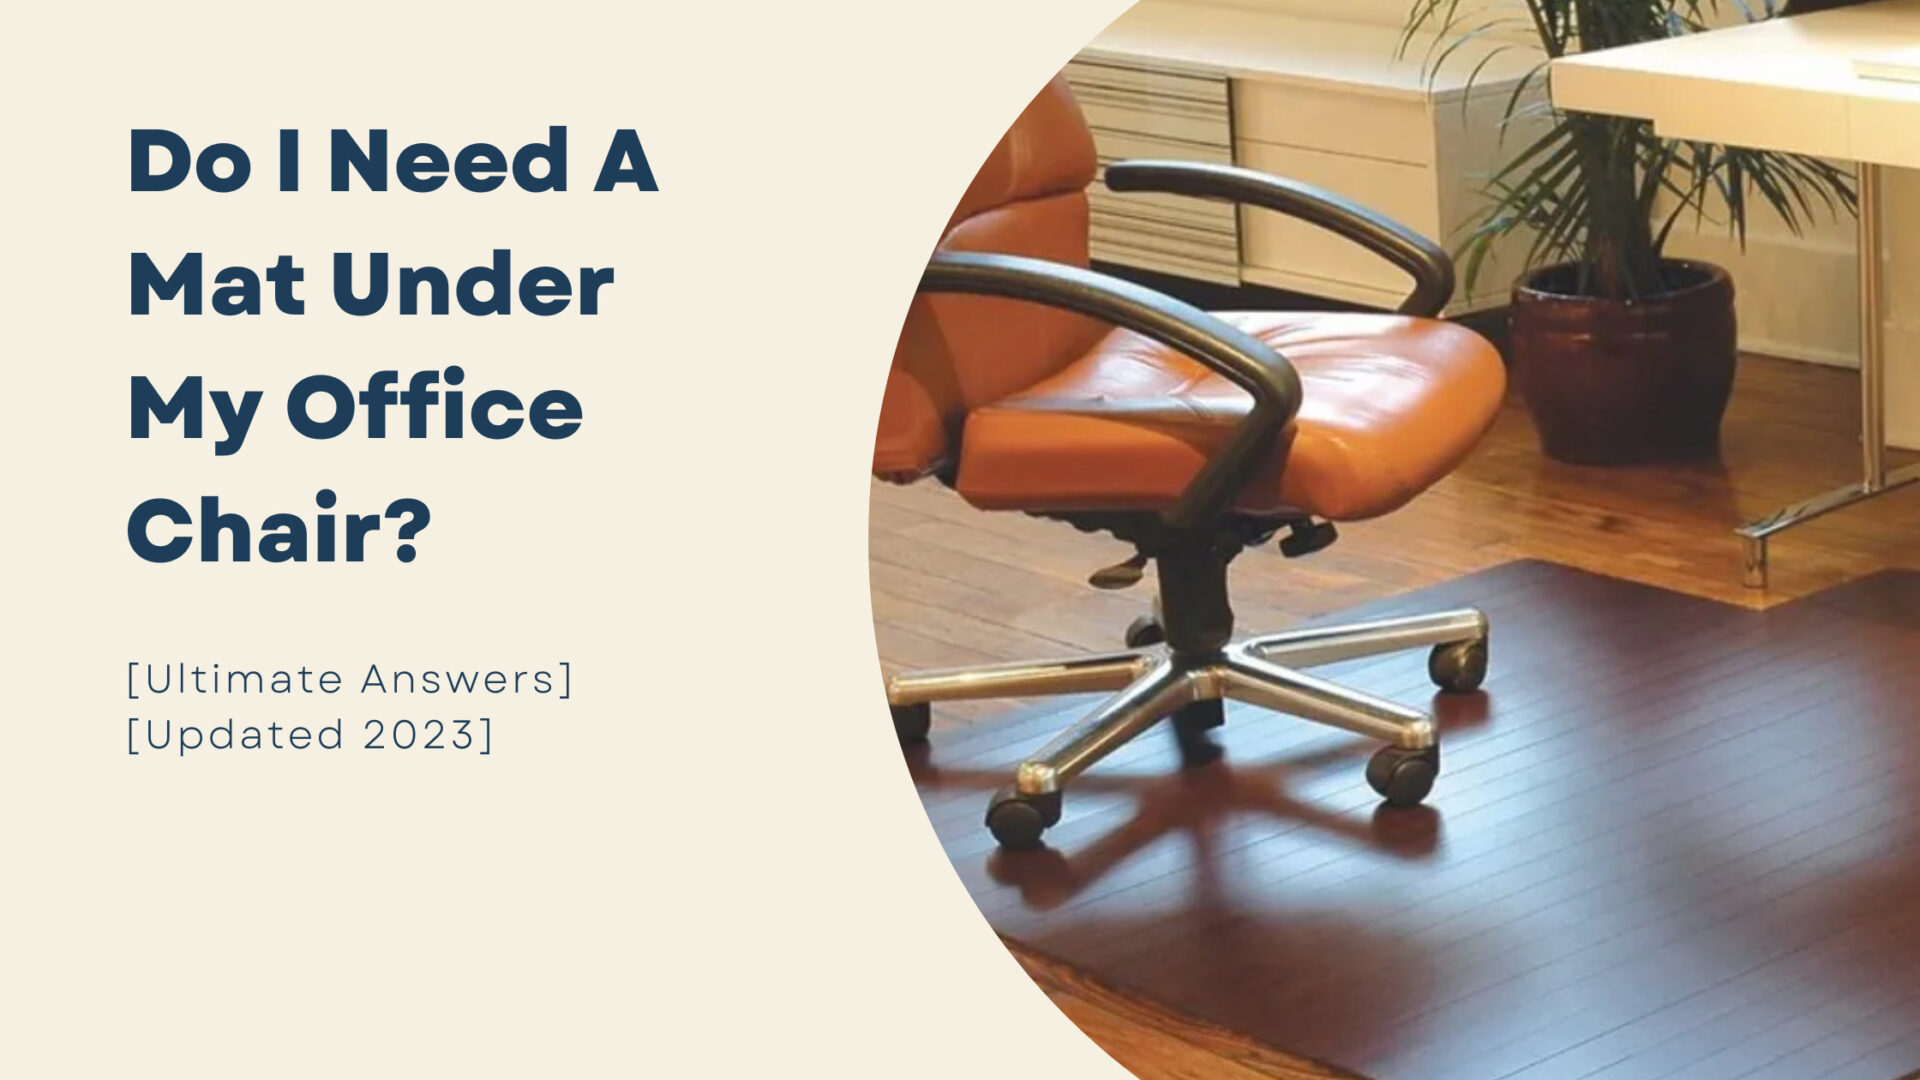 Do I Need A Mat Under My Office Chair